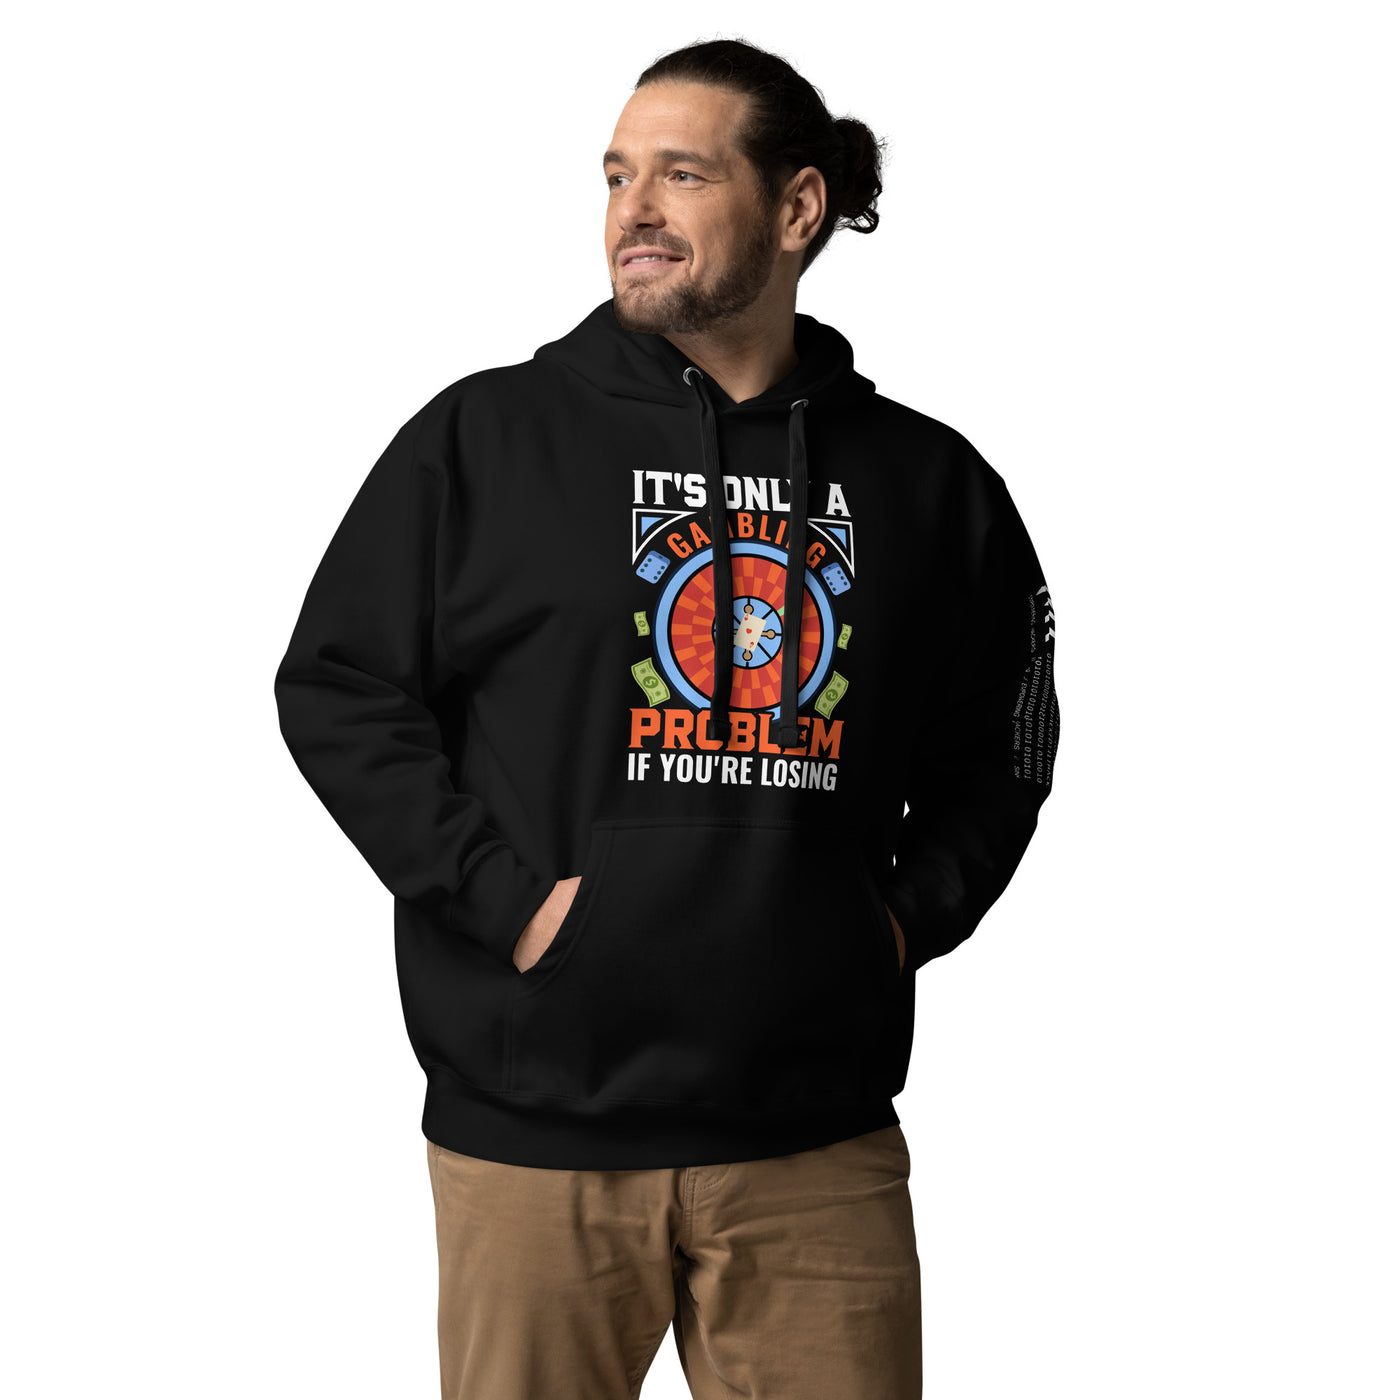 It's only a Gambling Problem, if I am losing V1 - Unisex Hoodie